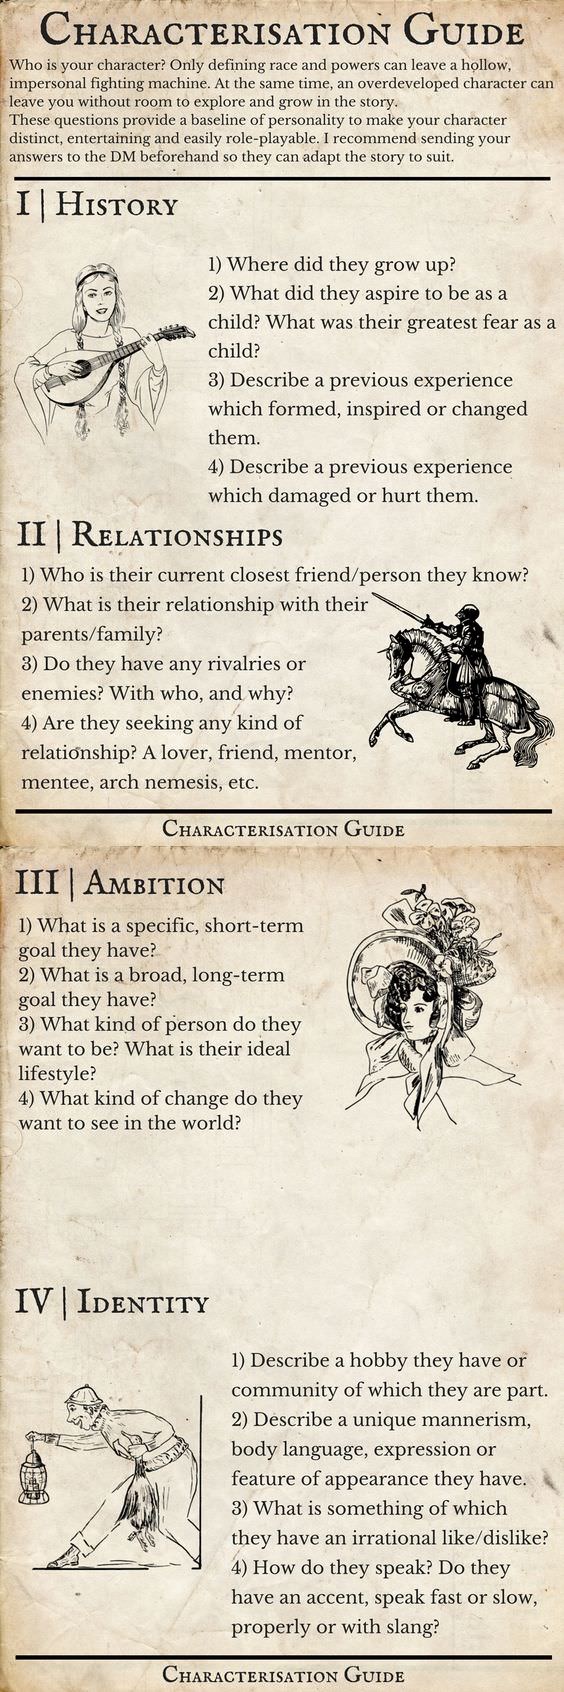 D&D meme - characterization guide - Characterisation Guide Who is your character? Only defining race and powers can leave a hollow, impersonal fighting machine. At the same time, an overdeveloped character can leave you without room to explore and grow in